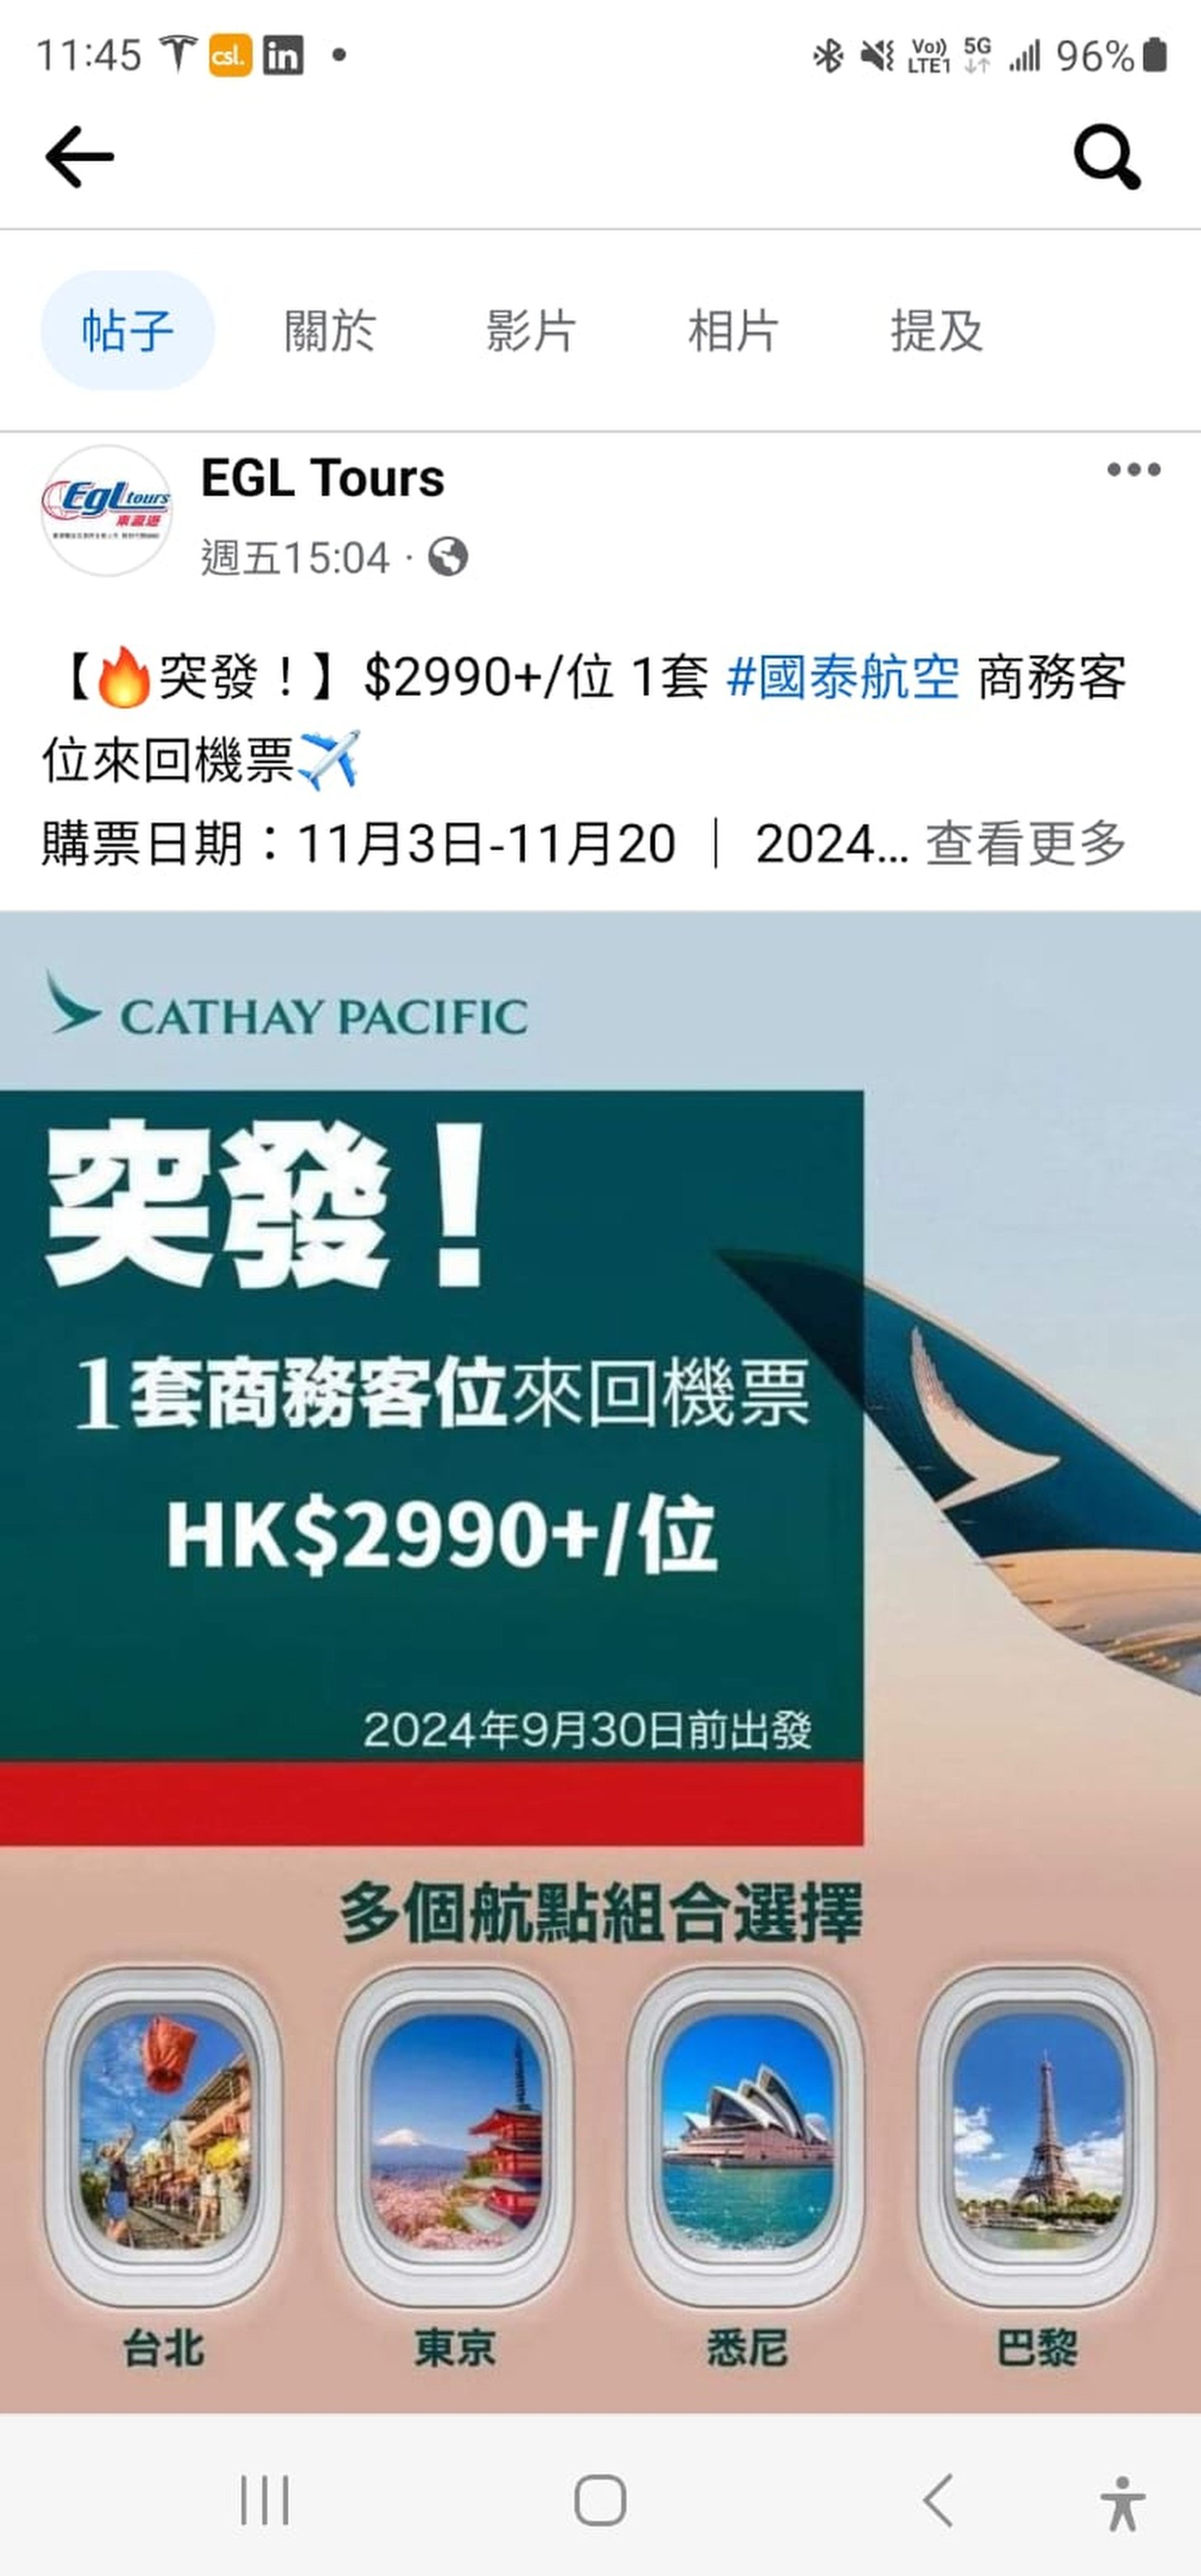 hong kong travel agents seek police help after surge in scammers using bogus social media accounts to cheat customers seeking cheap deals